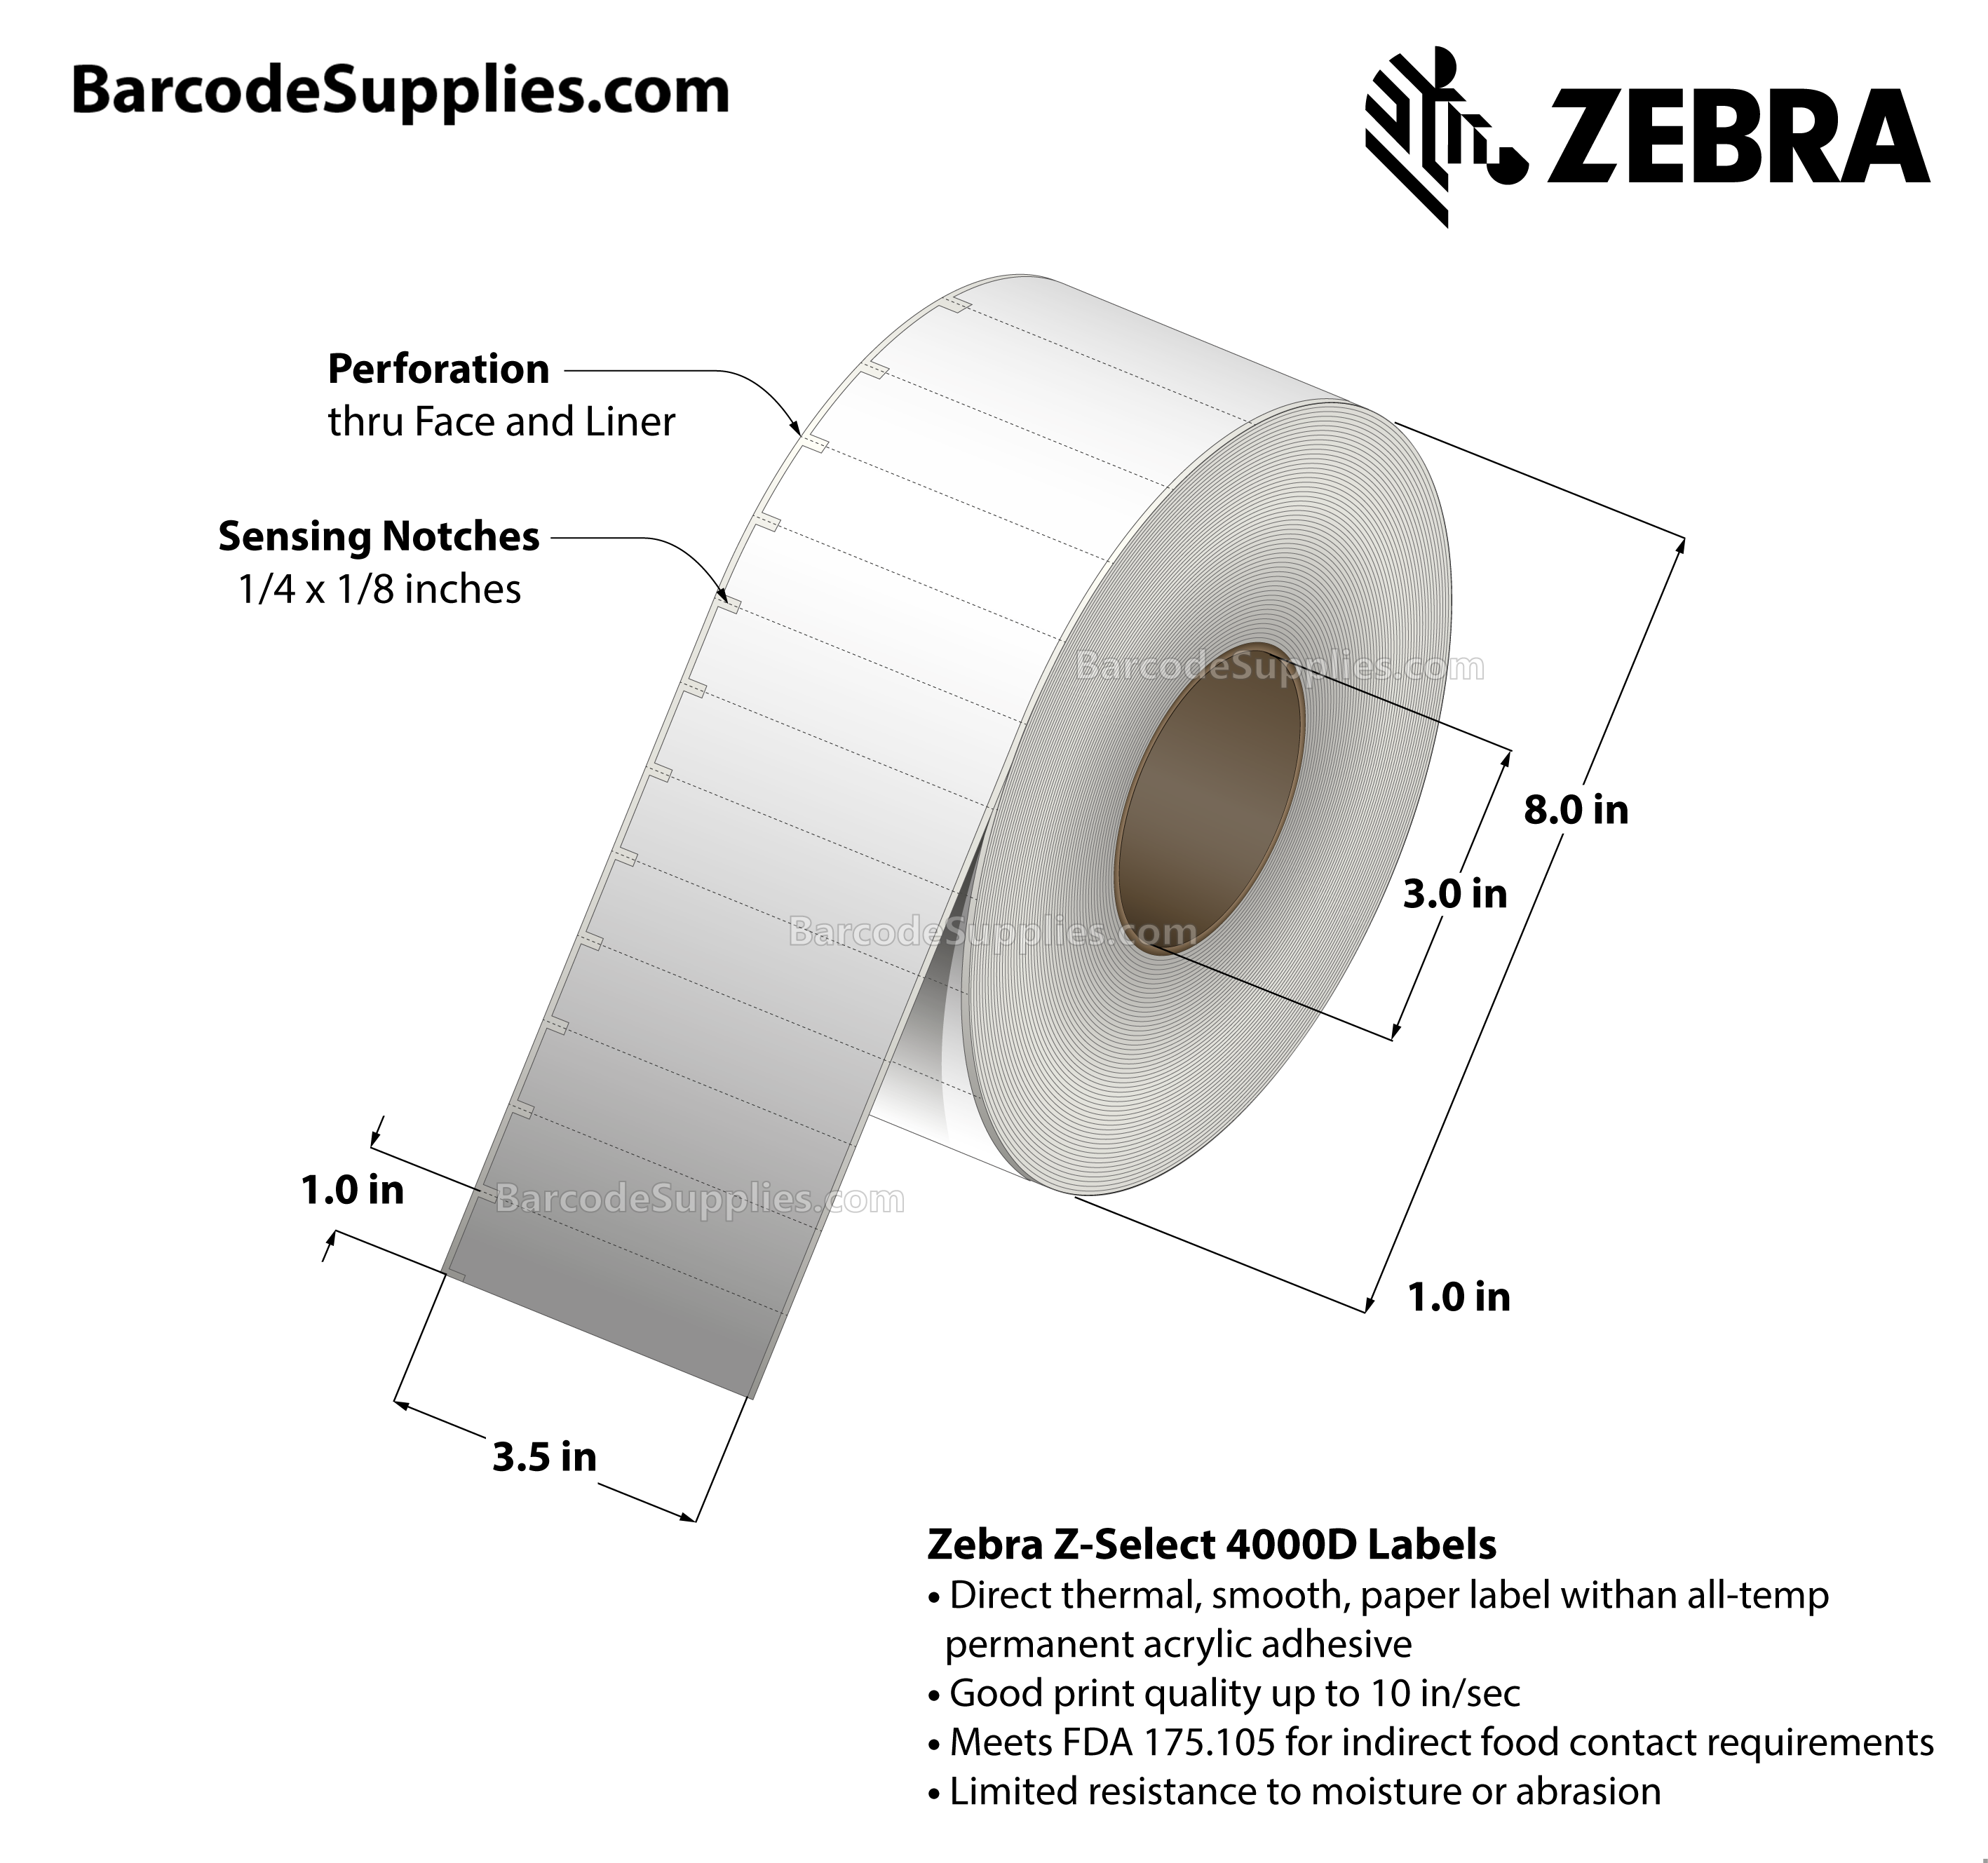 3.5 x 1 Direct Thermal White Z-Select 4000D Labels With All-Temp Adhesive - Label has square edges and sensing notches on left side - Perforated - 5760 Labels Per Roll - Carton Of 6 Rolls - 34560 Labels Total - MPN: HC10000684